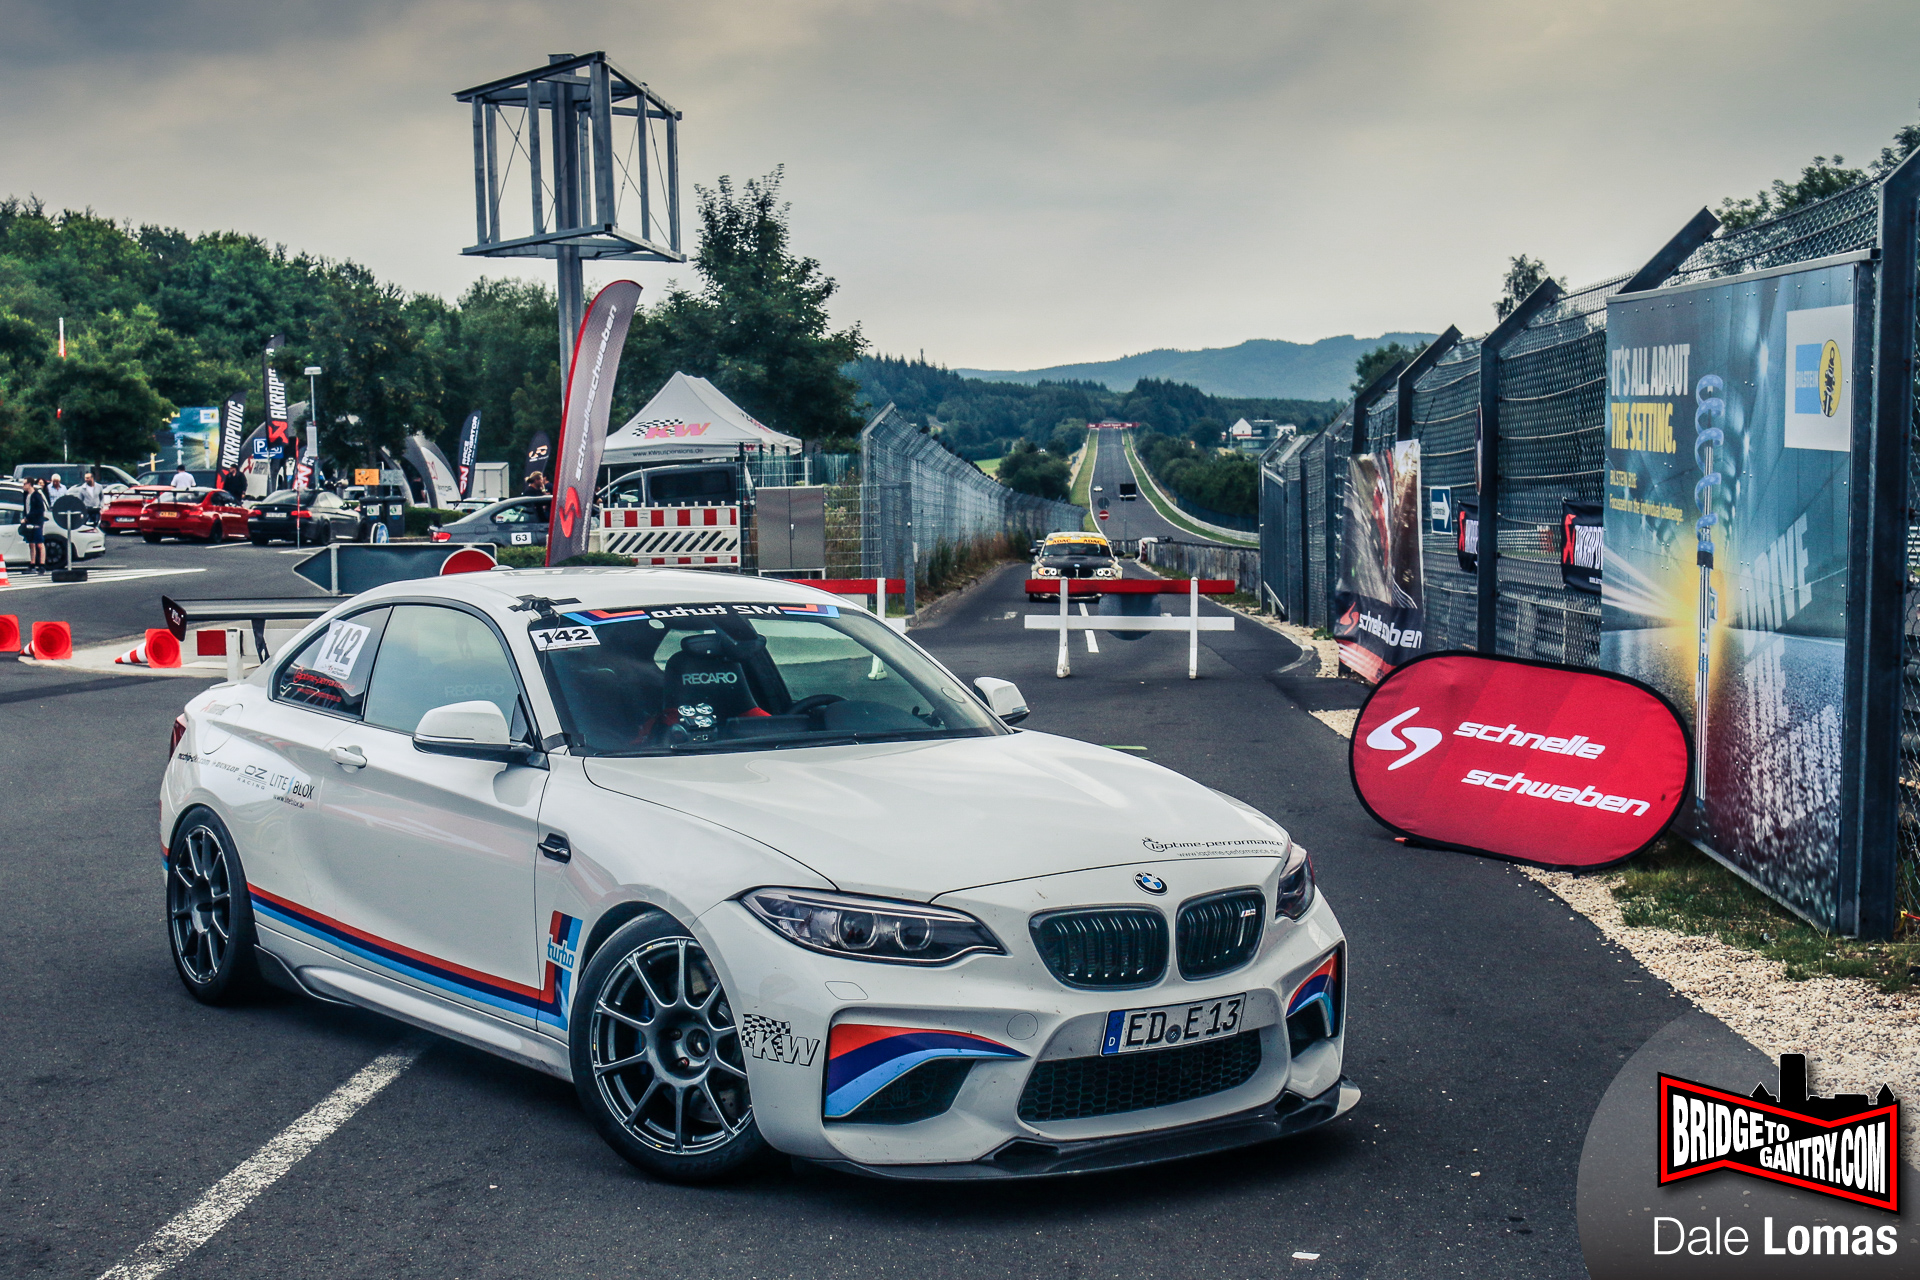 Simon's BMW M2-LT, chassis #002 is a manual gearbox, turbocharged monster. And I love it.